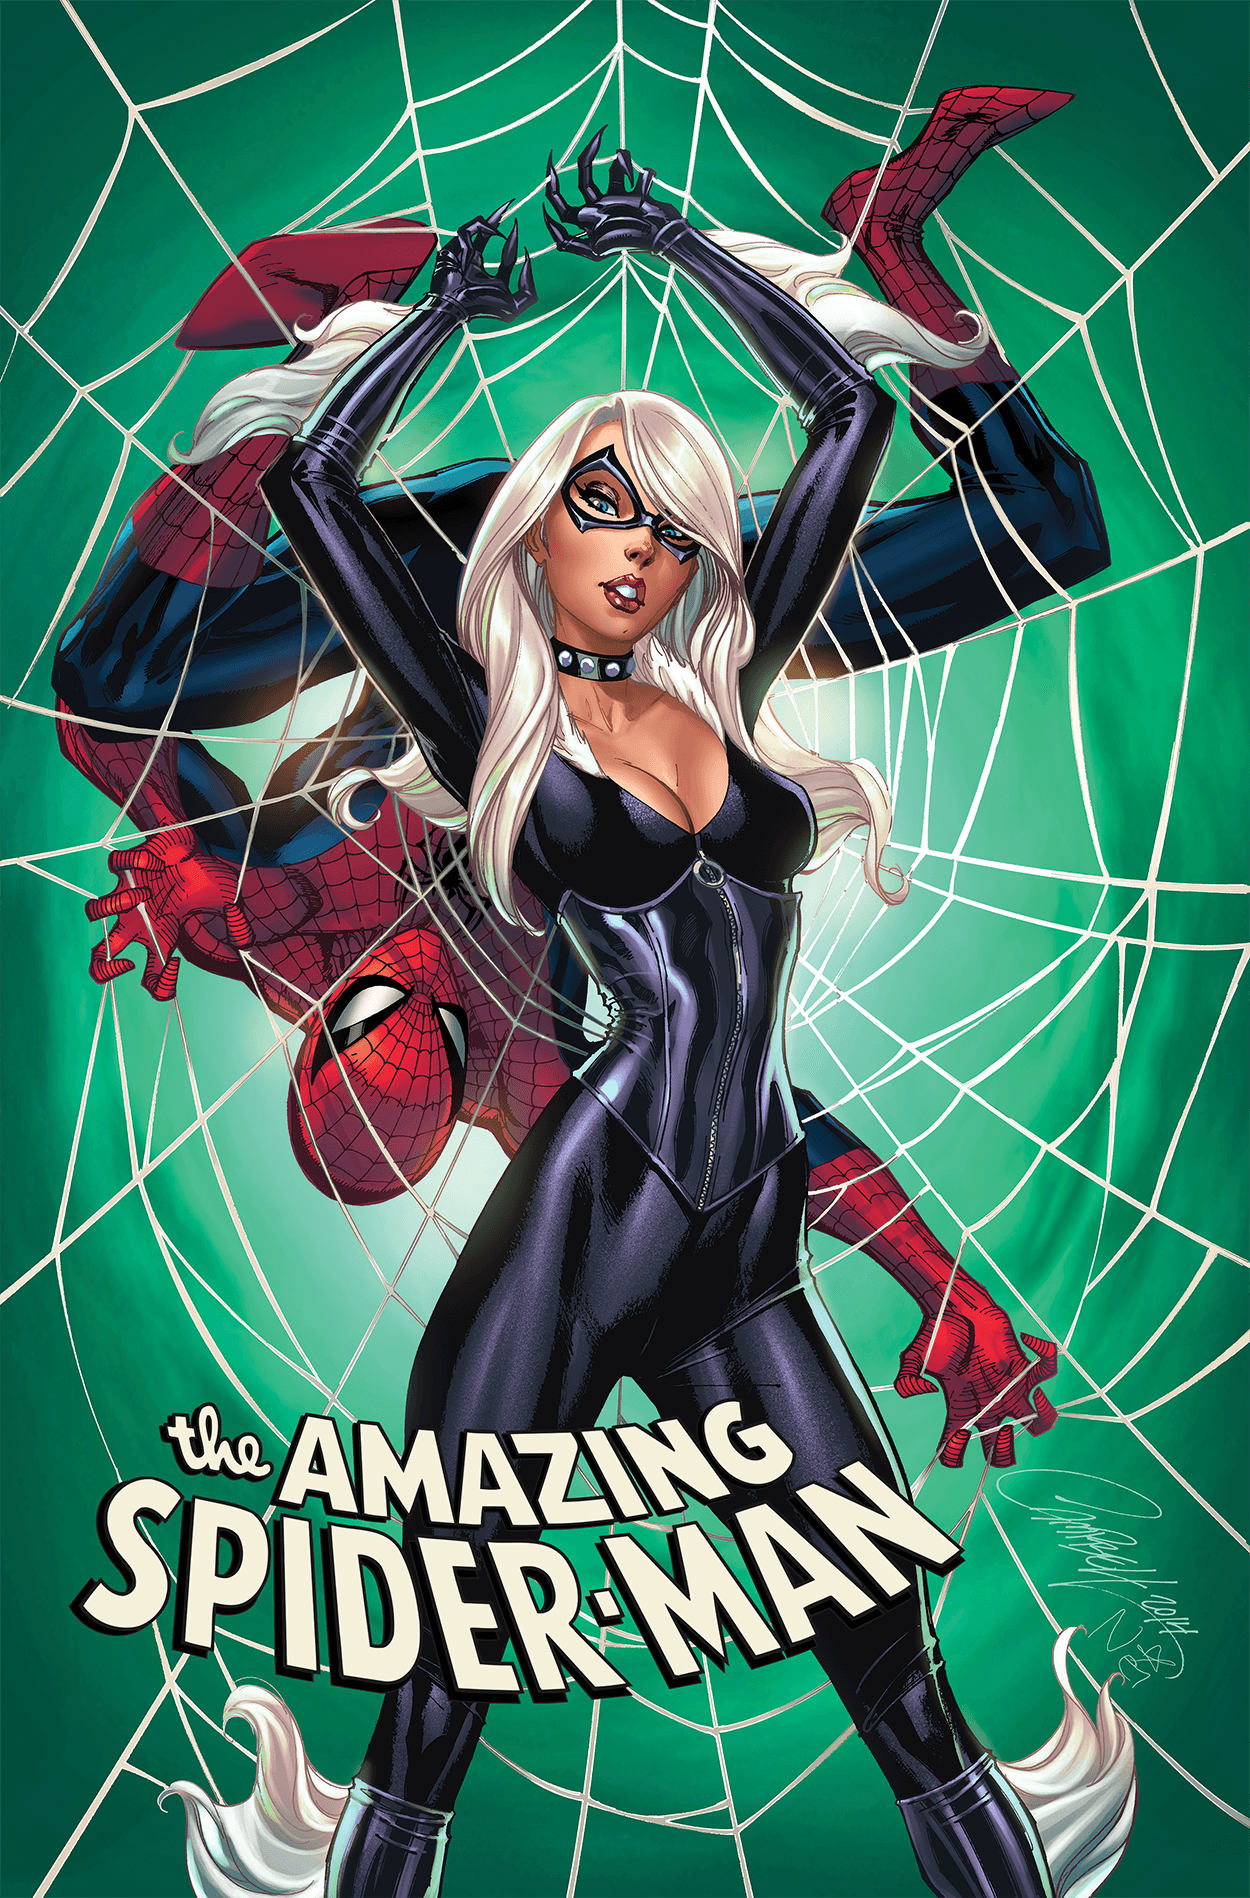 Amazing Spider-Man #10 Variant art by J. Scott Campbell with colors by Nei Ruffino